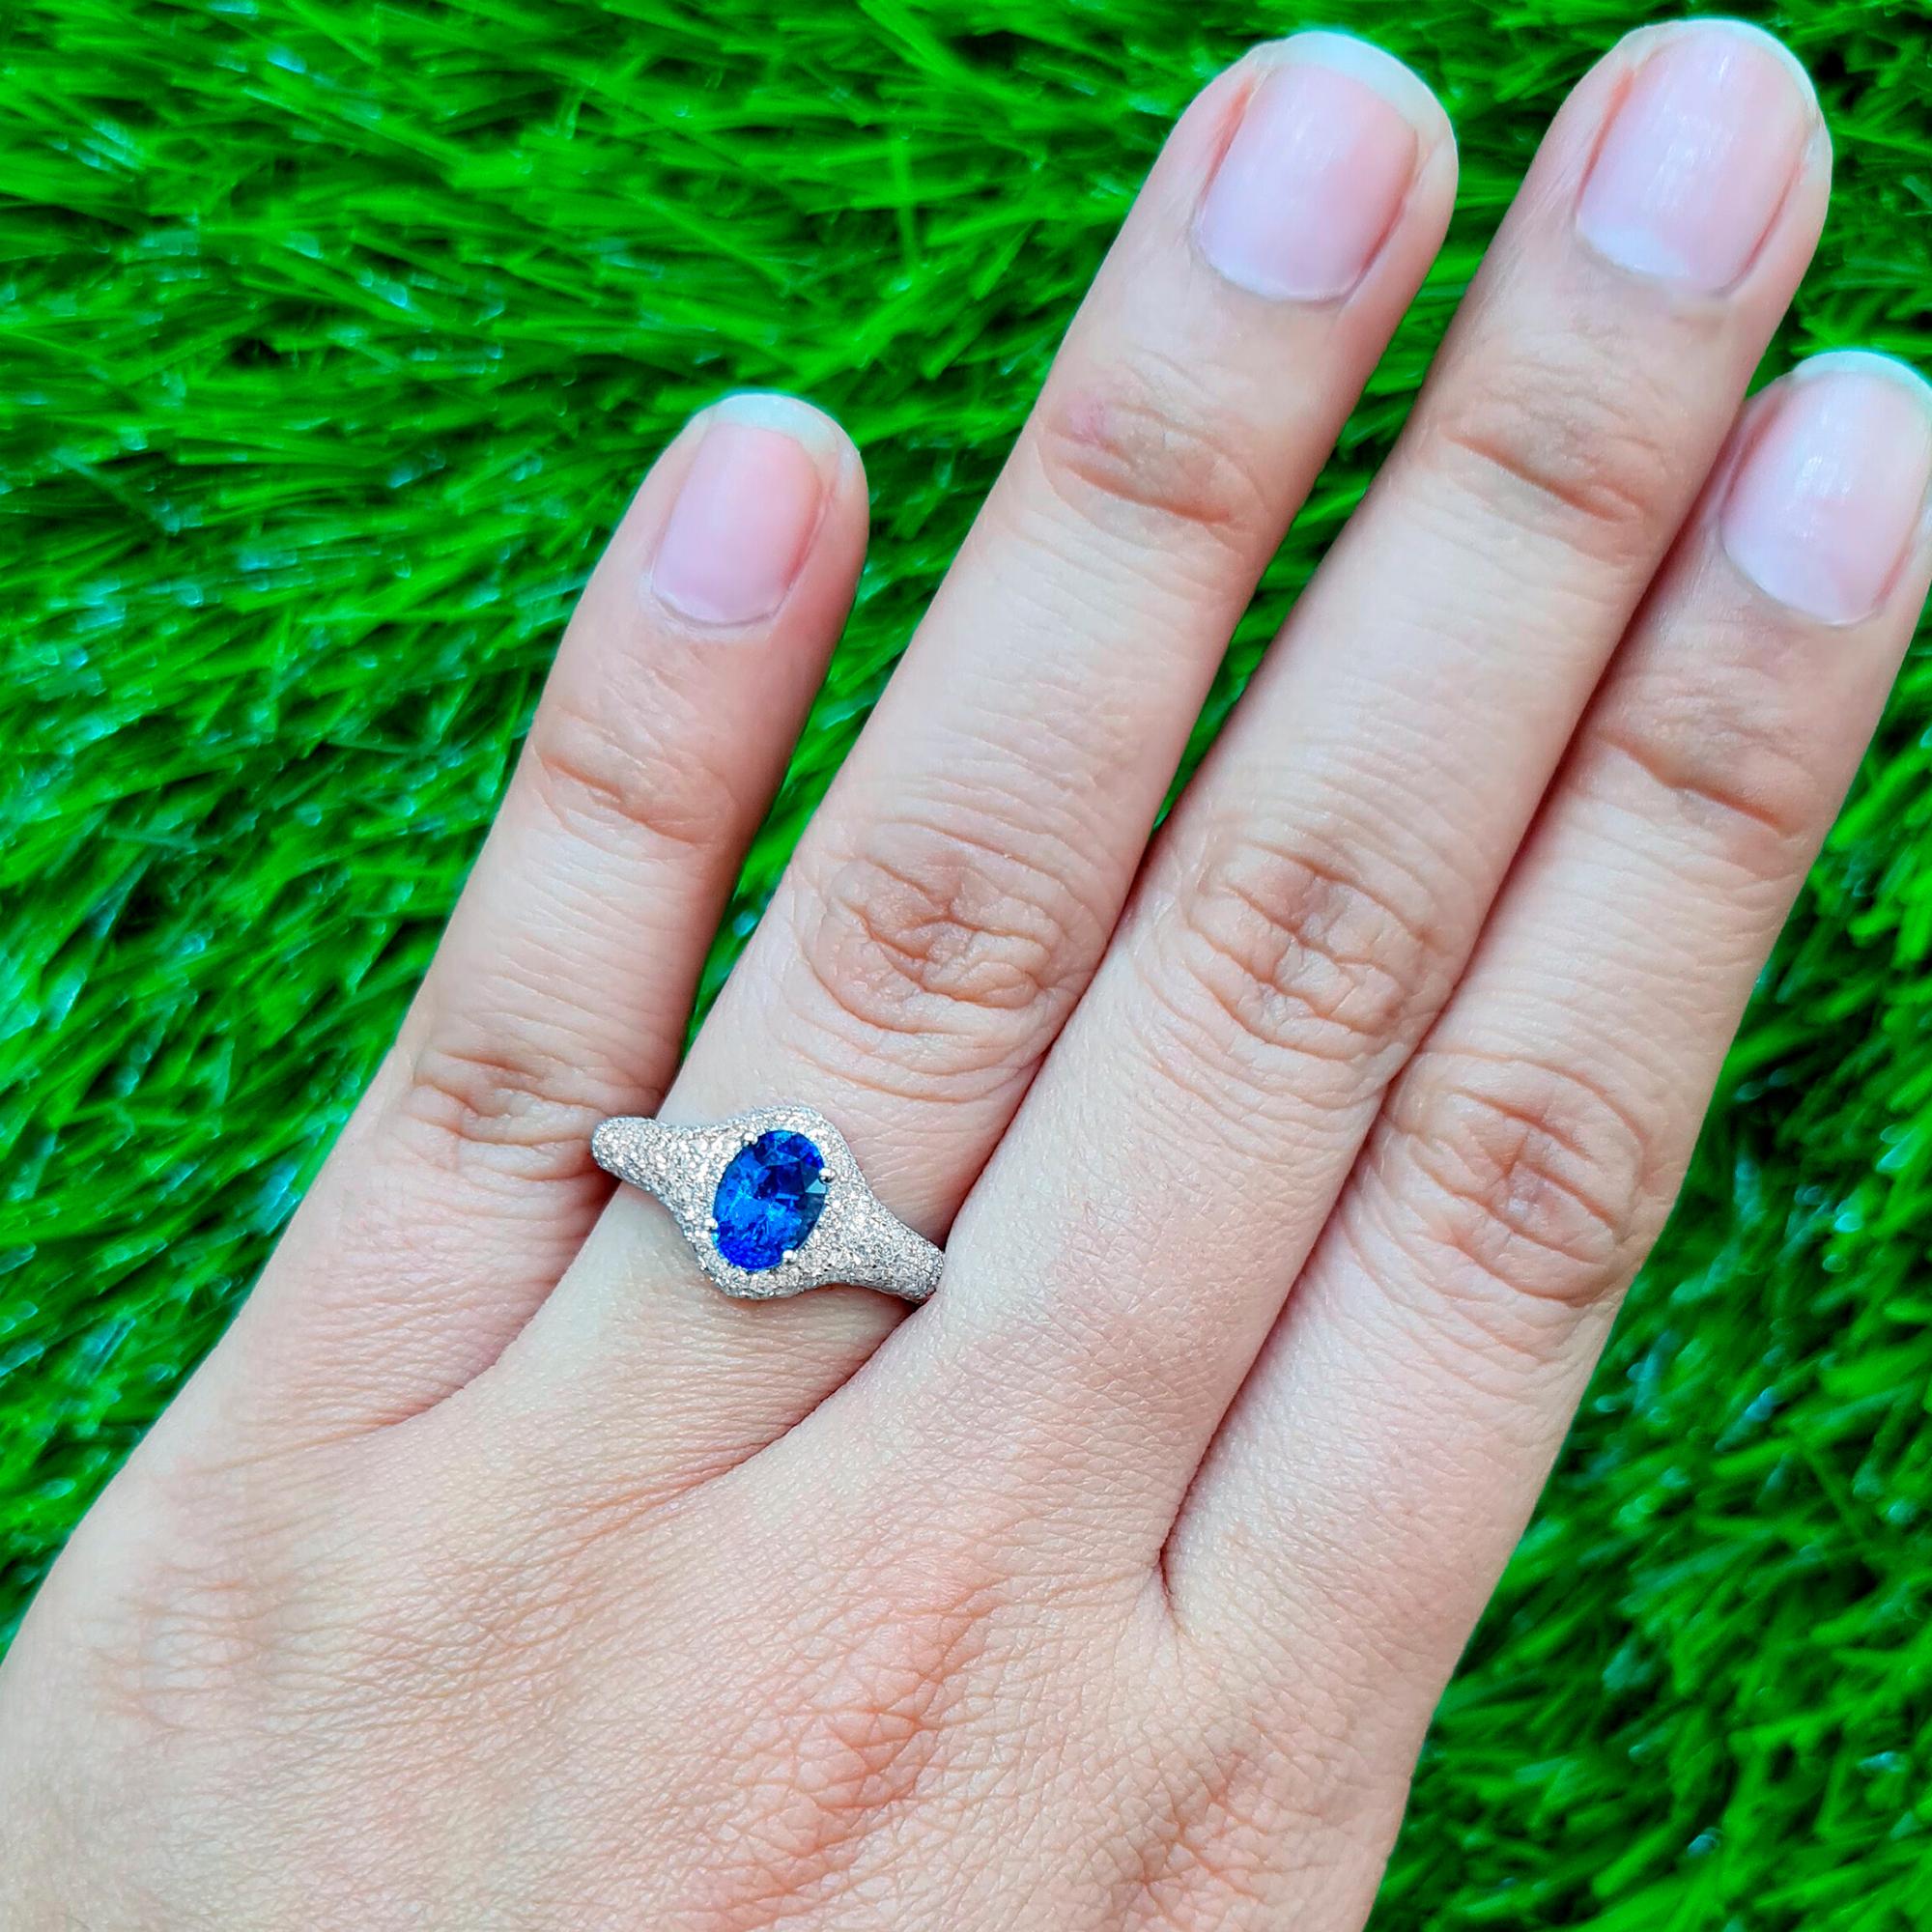 It comes with the Gemological Appraisal by GIA GG/AJP
All Gemstones are Natural
Blue Sapphire = 1.10 Carat
Diamonds = 0.73 Carats
Metal: 18K White Gold
Ring Size: 7* US
*It can be resized complimentary
